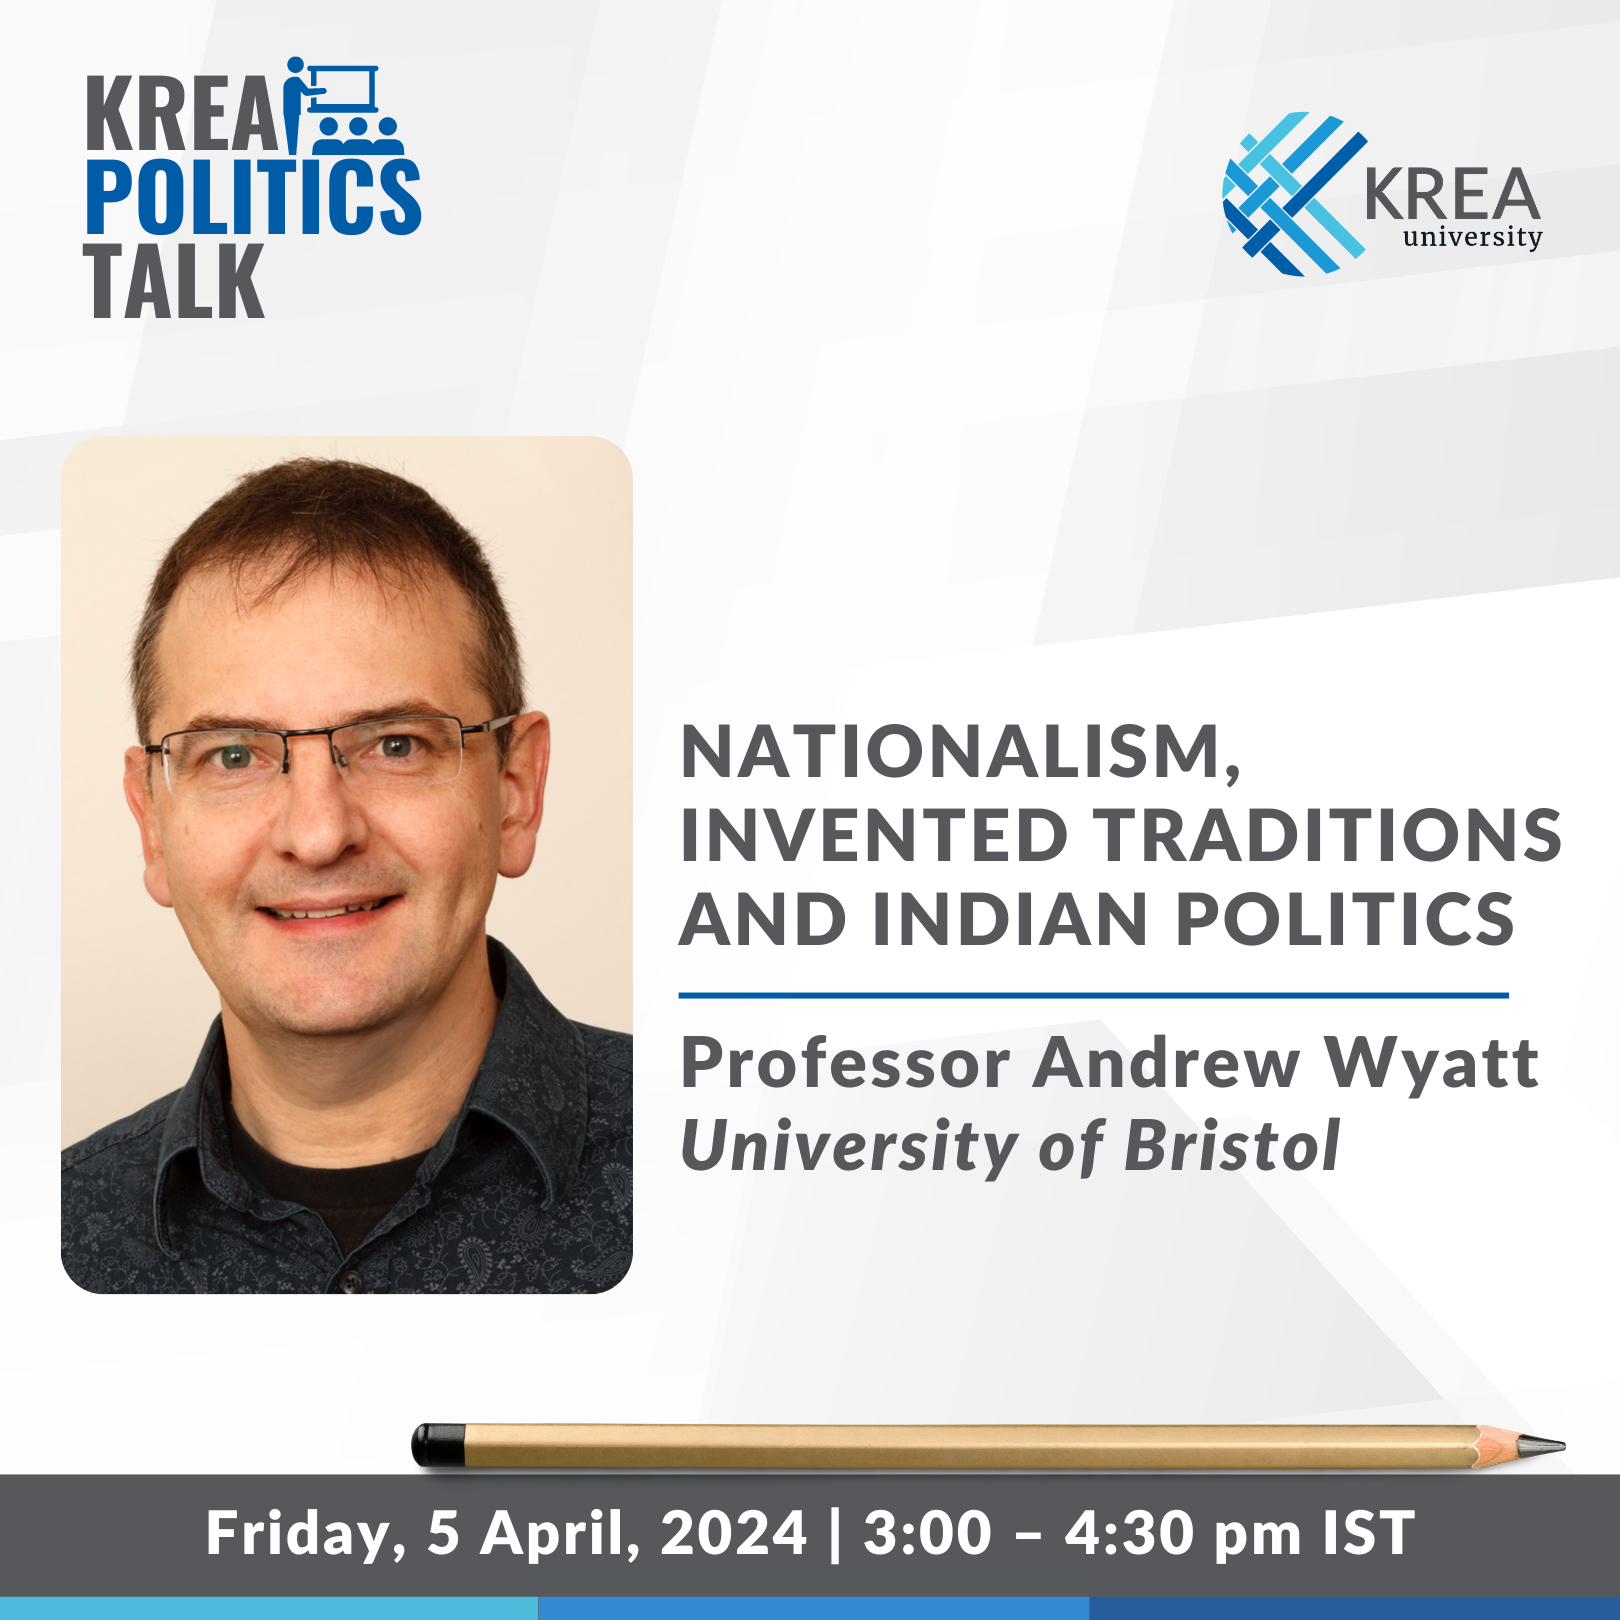 A Talk on Nationalism, Invented Traditions and Indian Politics by Professor Andrew Wyatt, University of Bristol, UK